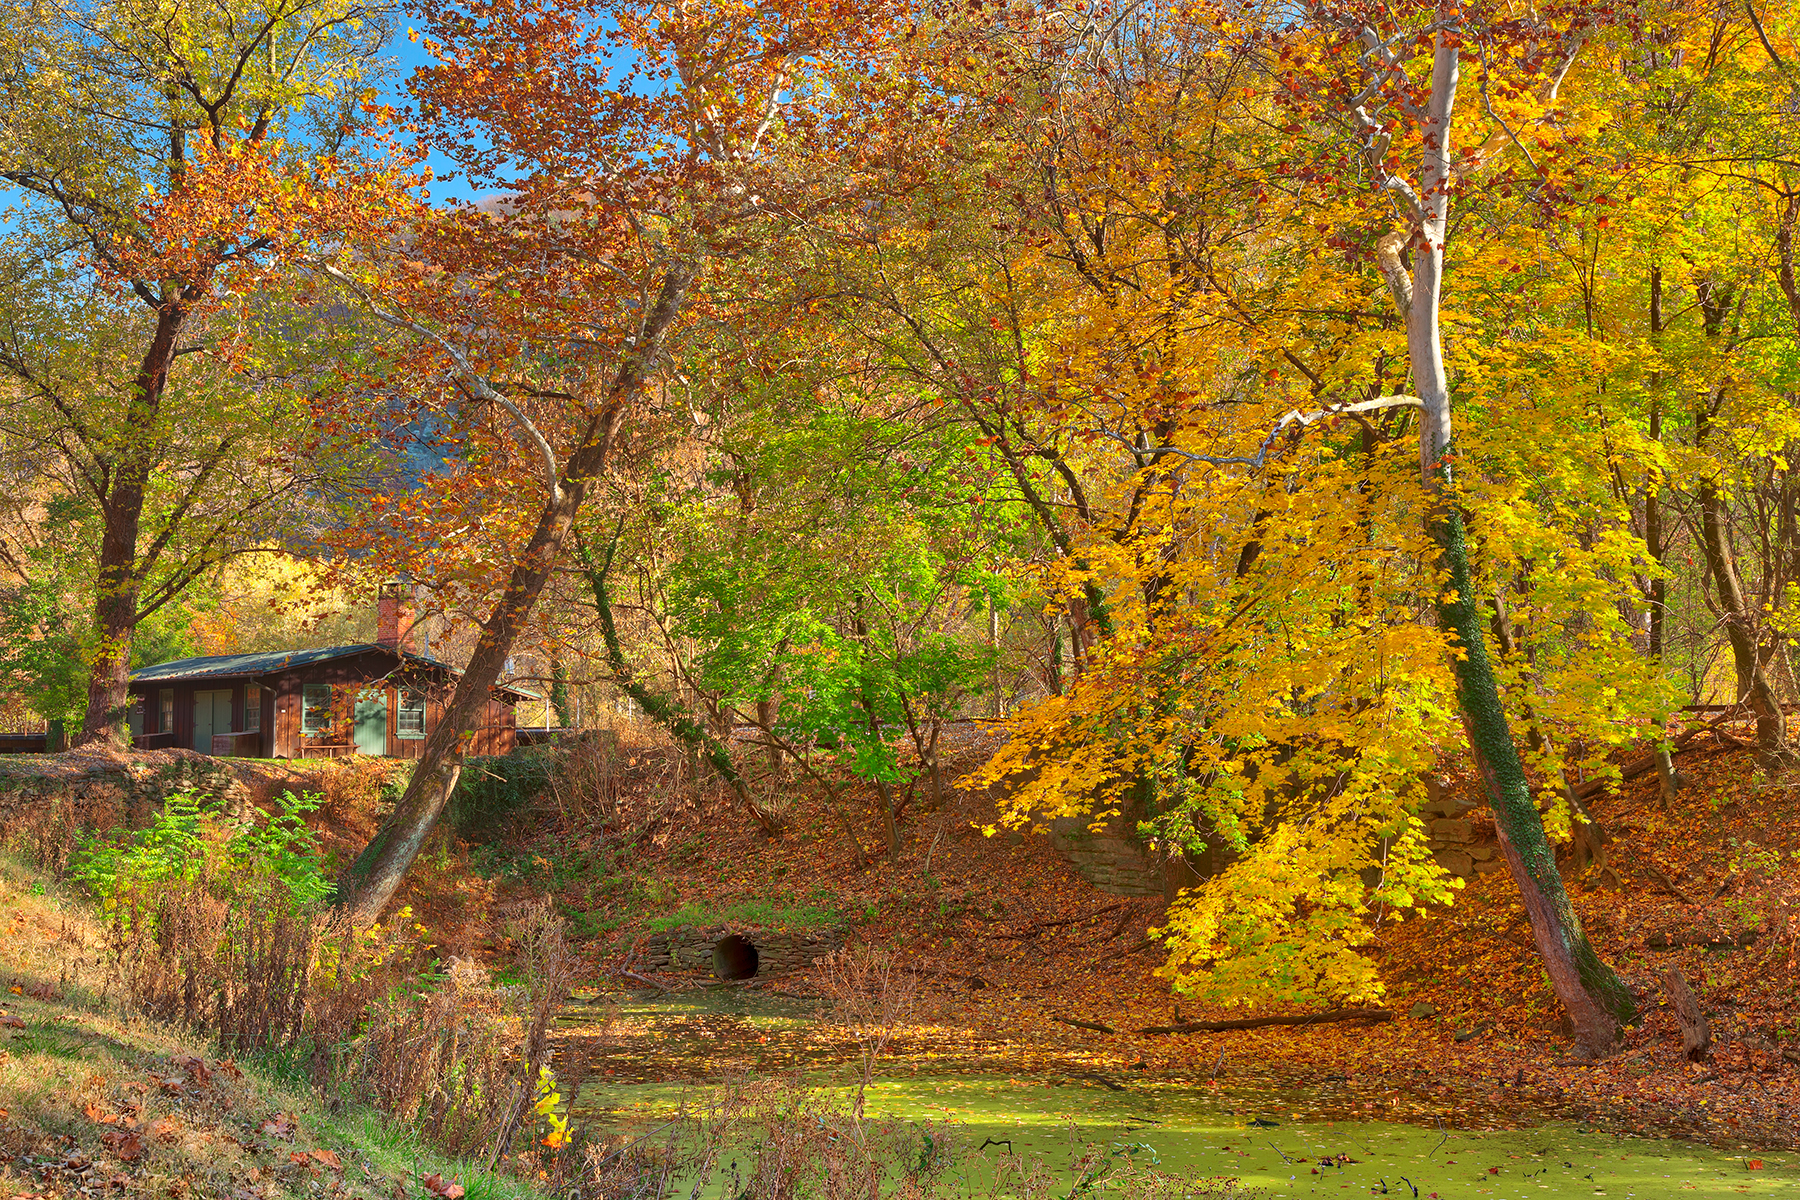 Autumn harpers ferry canal - hdr photo